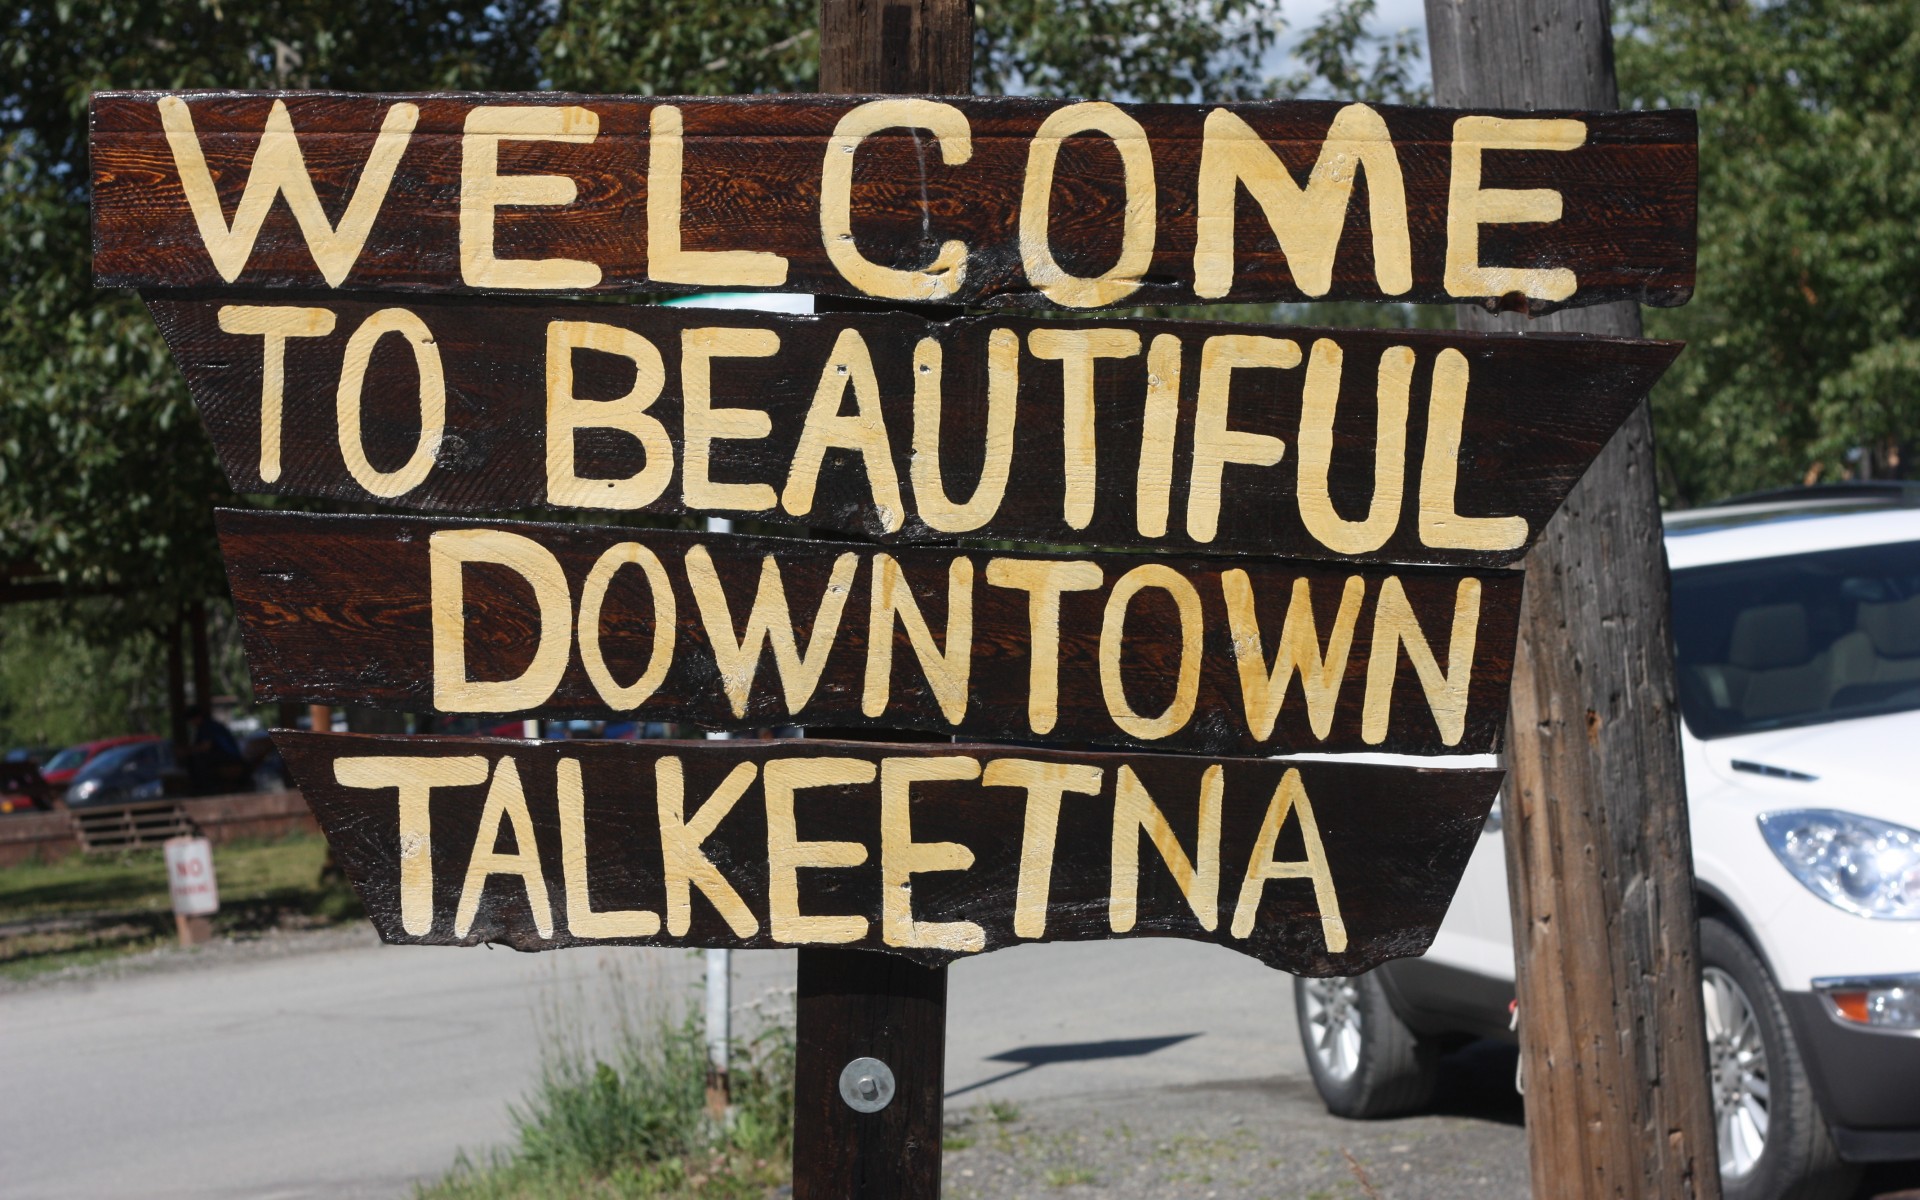 Welcome to beautiful downtown talkeetna